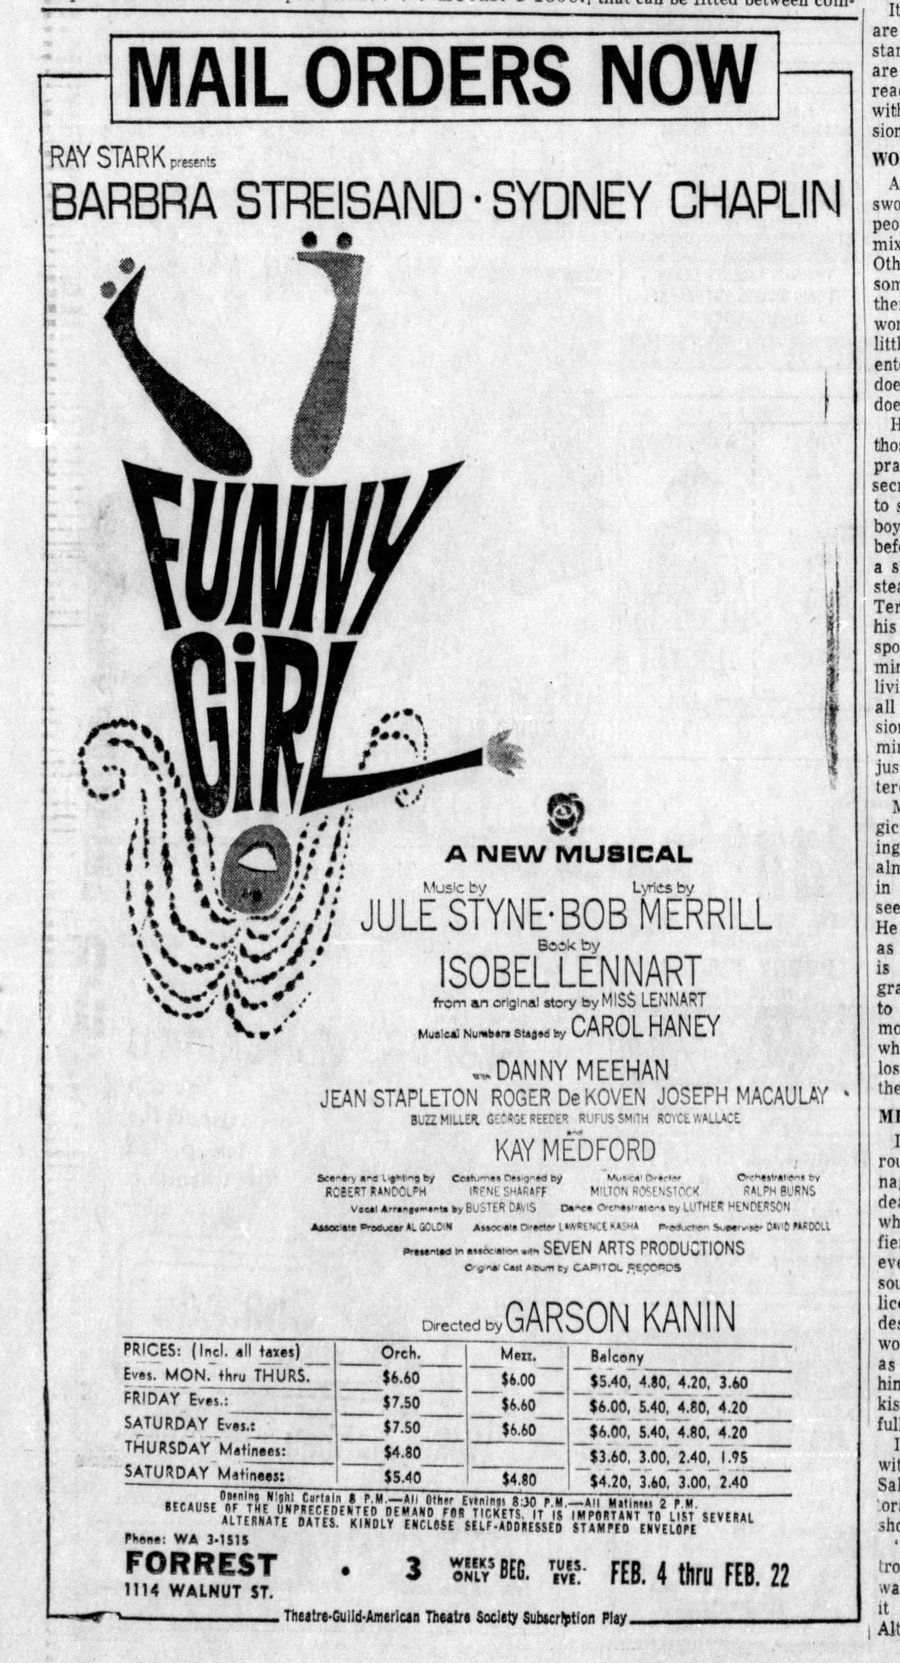 Newspaper advert for ticket mail orders for the Forrest Theatre previews of Funny Girl.